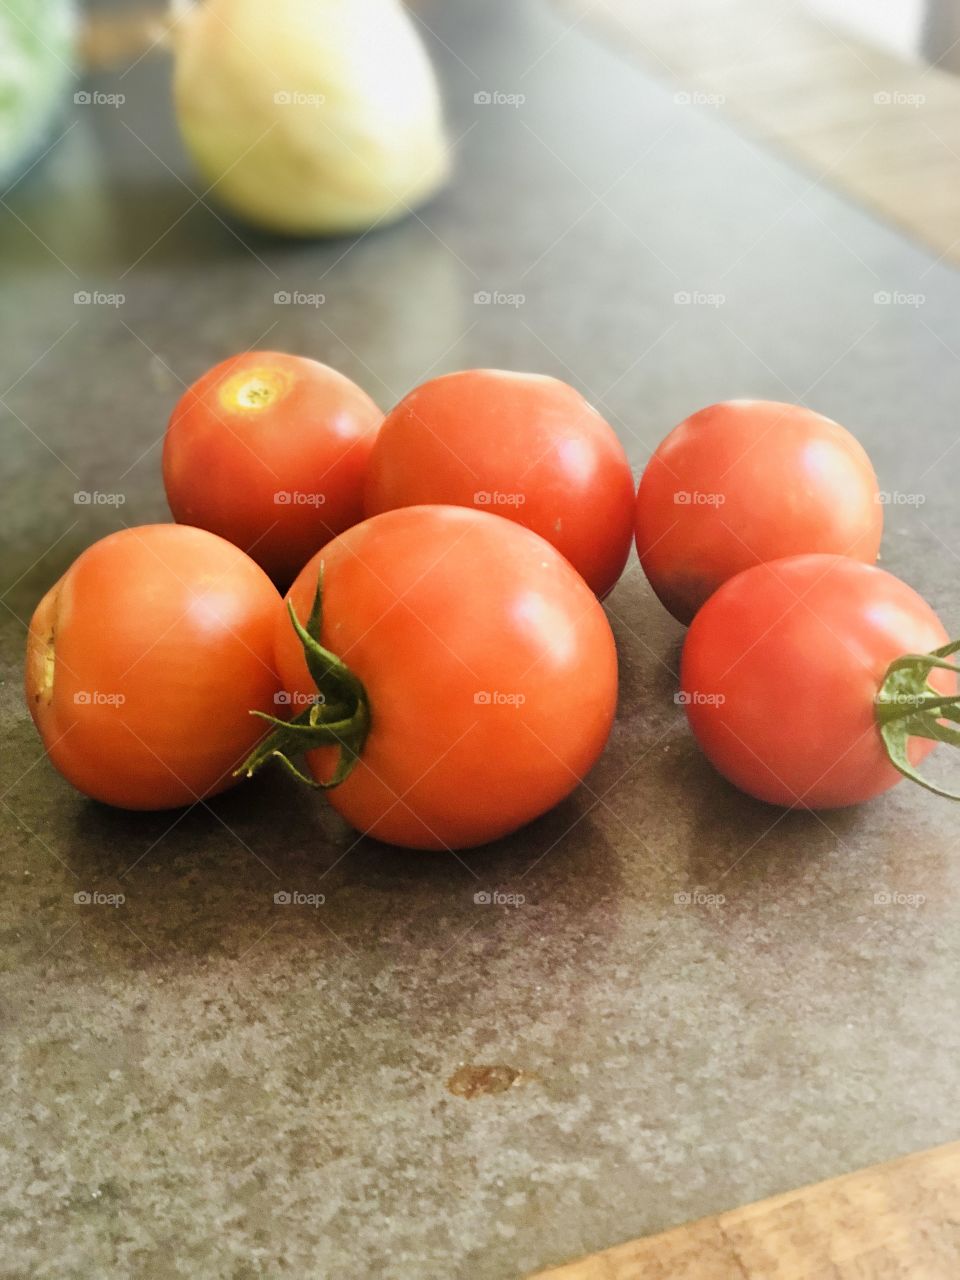 Tomatoes from my garden